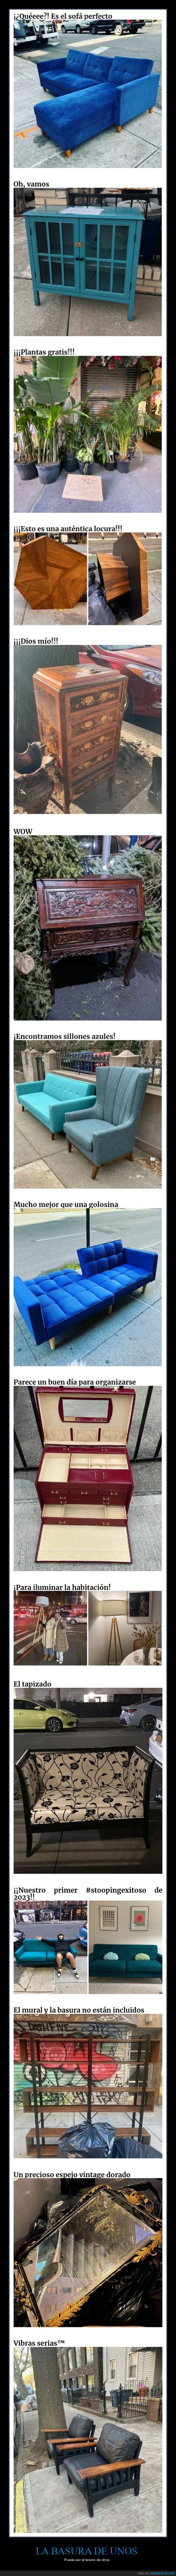 stooping,muebles,calle